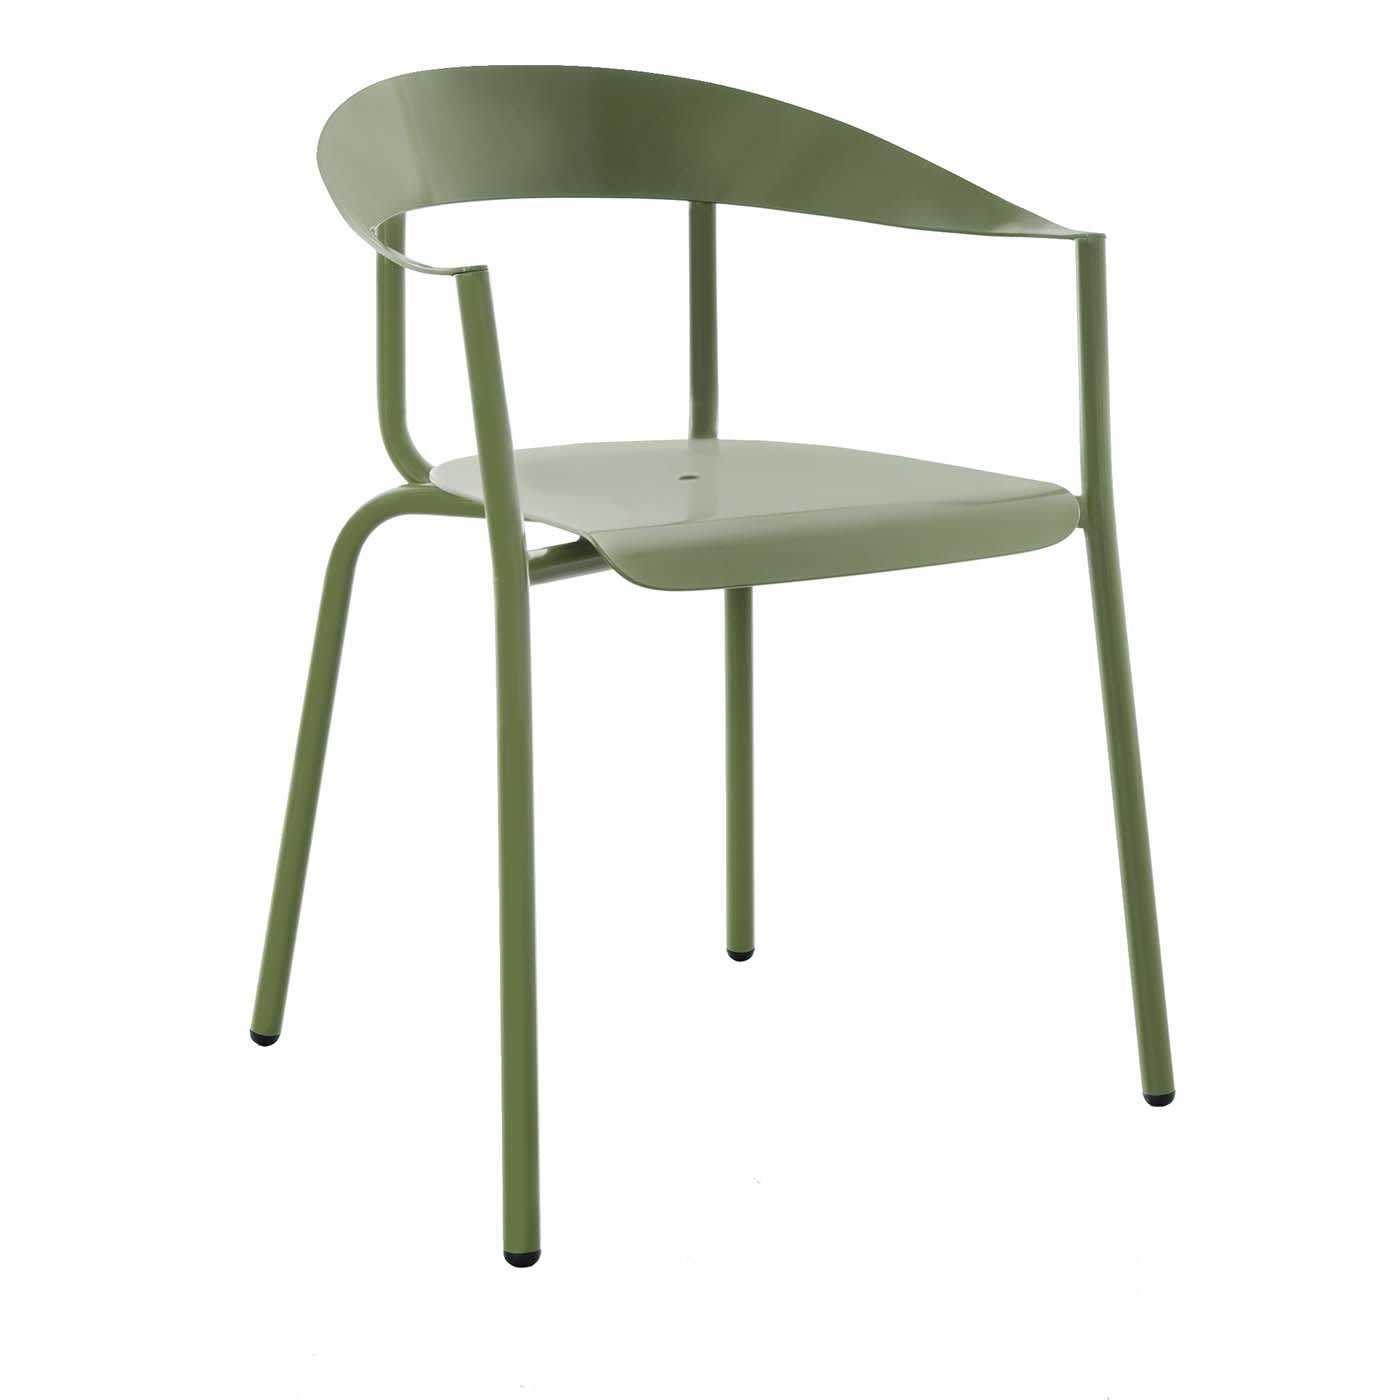 Olive Green AluMito Chair with Armrests by Pascal Bosetti - Altek Italia Design